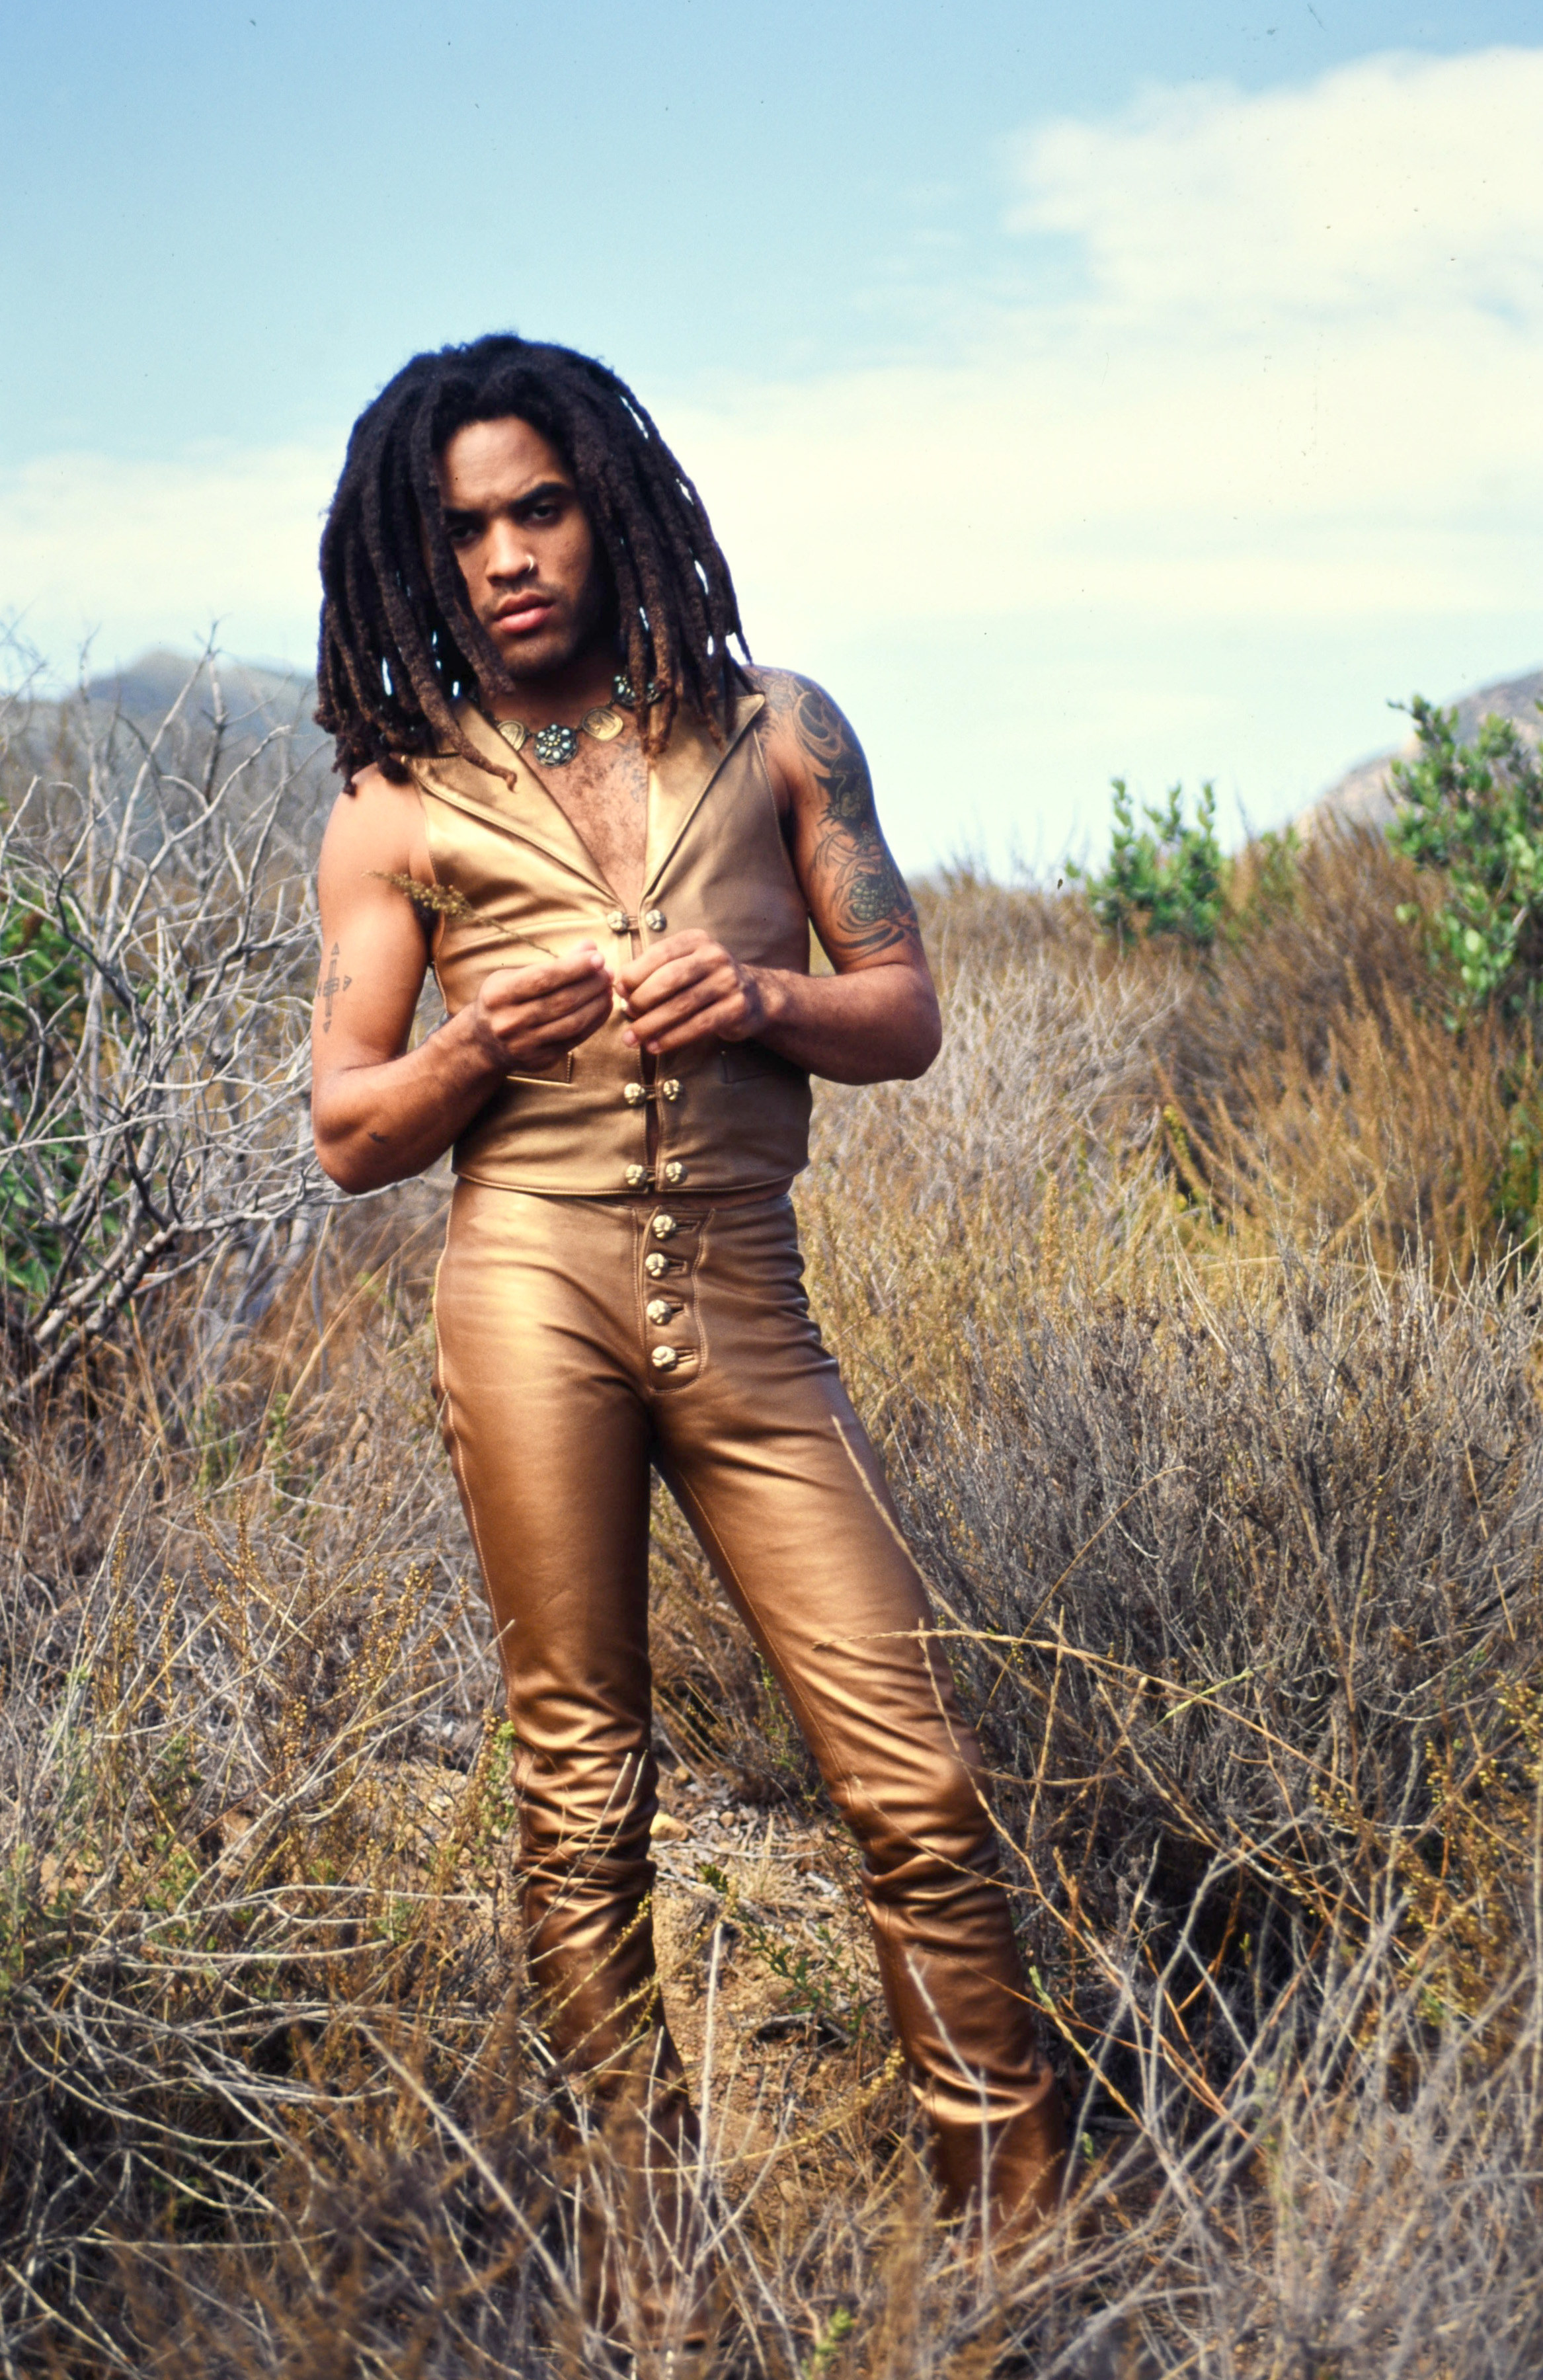 Kravitz in a leather suit in a field in at his home